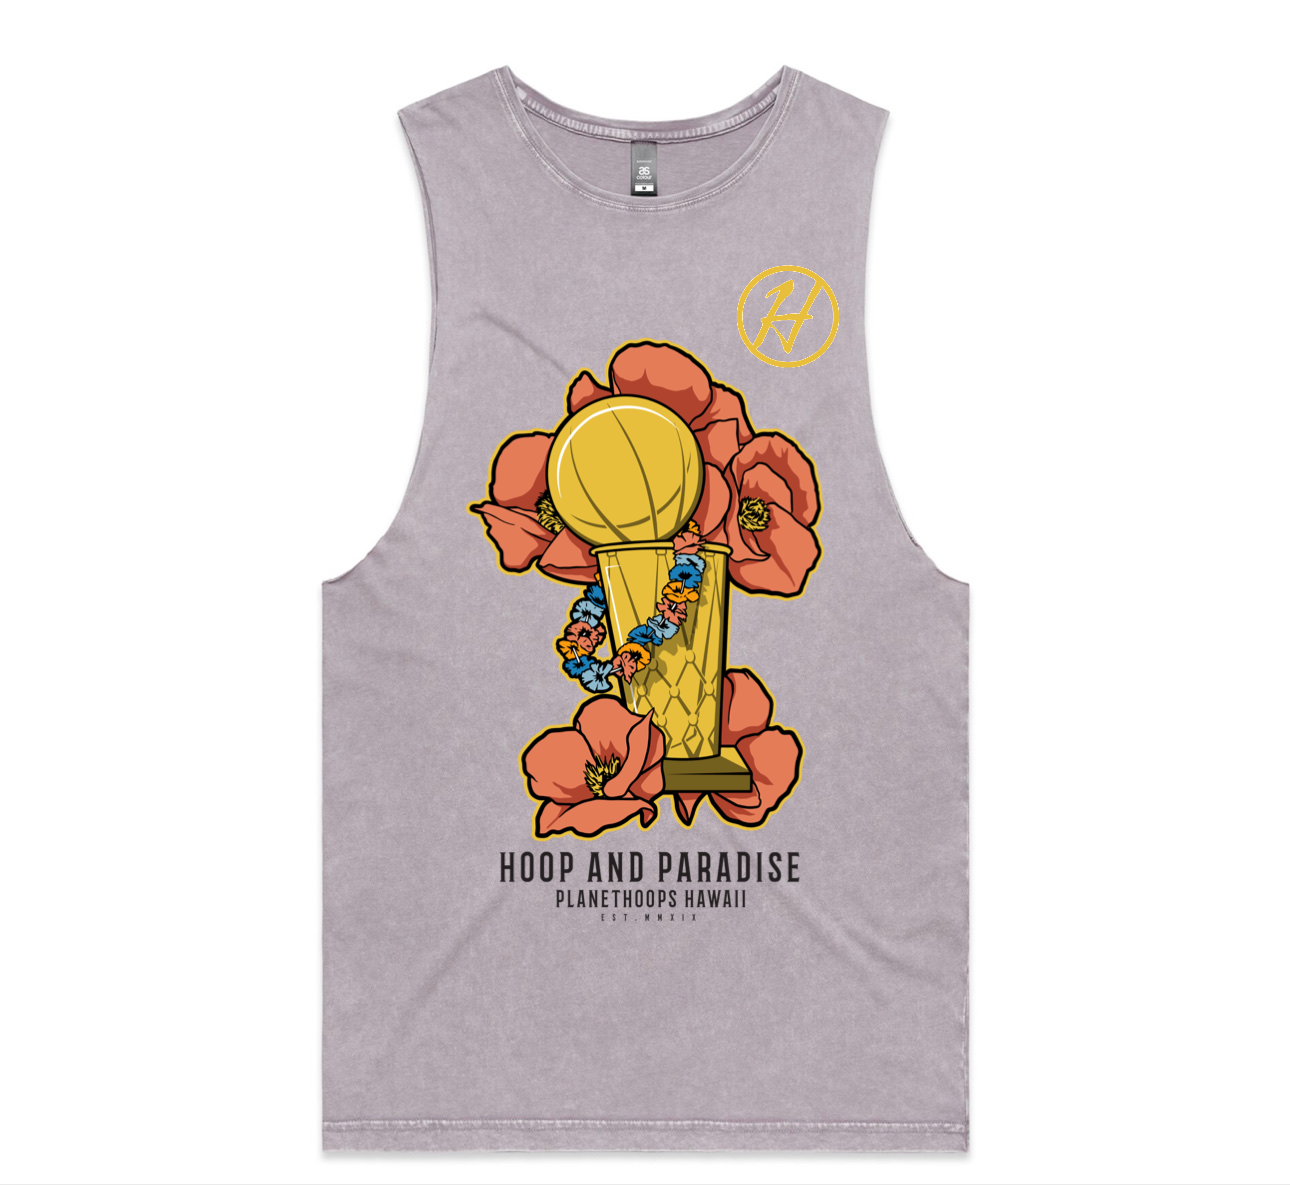 Hoops and paradise tanktop